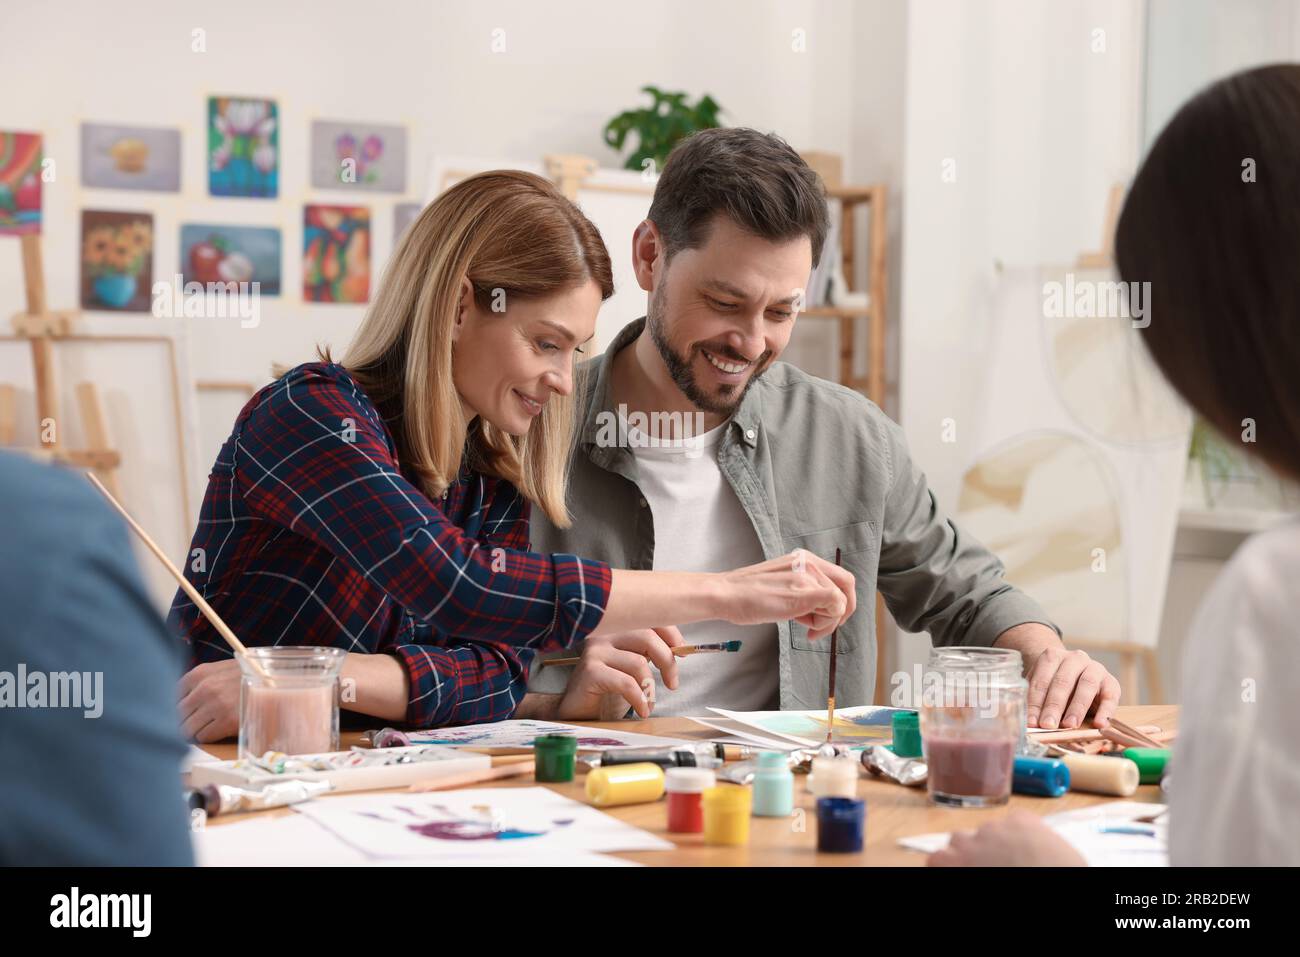 Group of students attending painting class in studio. Creative hobby Stock Photo